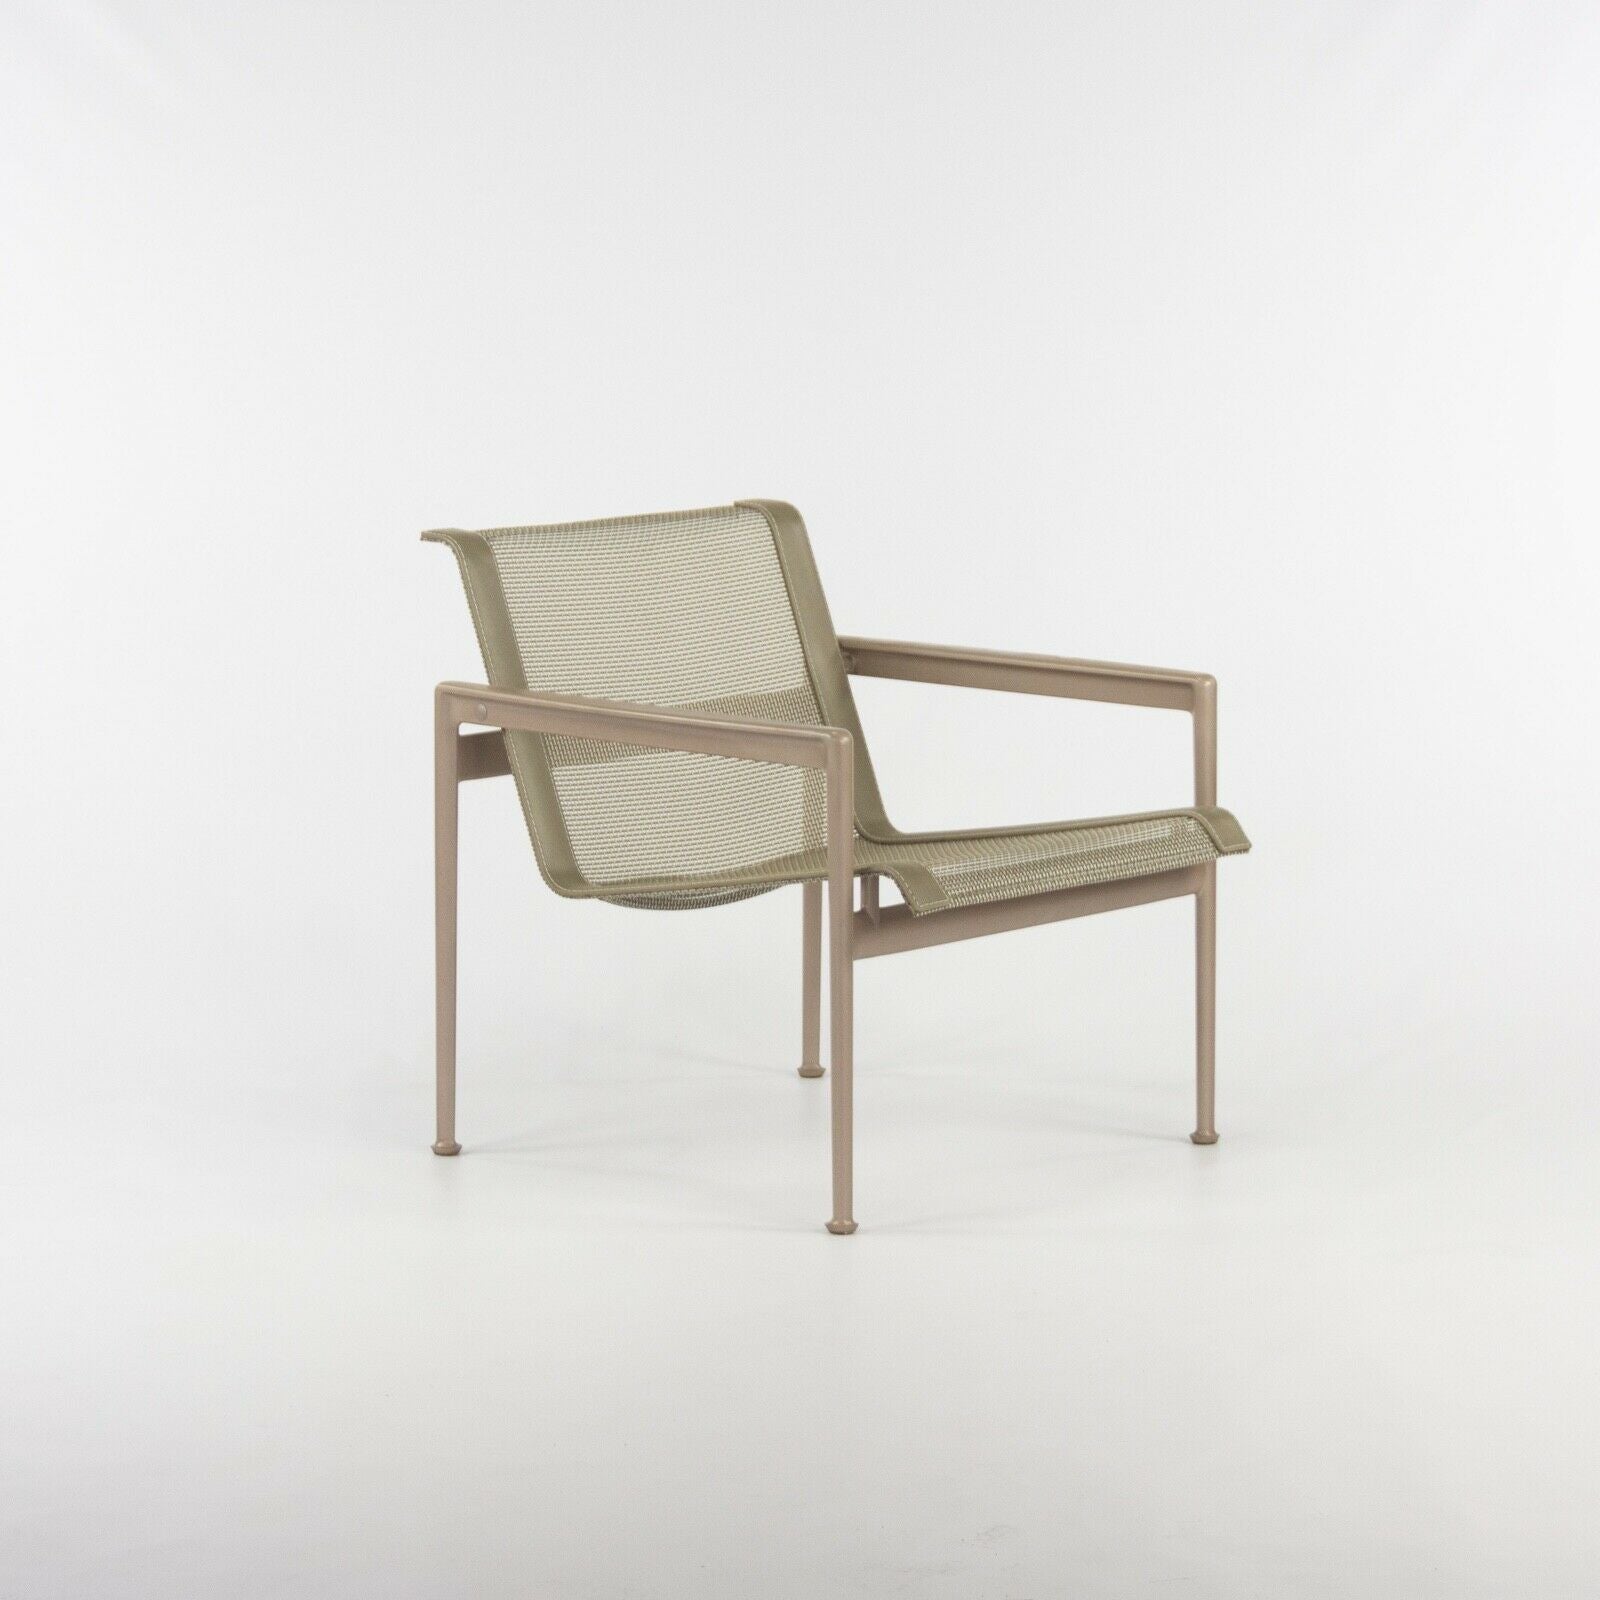 2020 Knoll Richard Schultz 1966 Series Outdoor Lounge Chair with Arms and Beige Frame